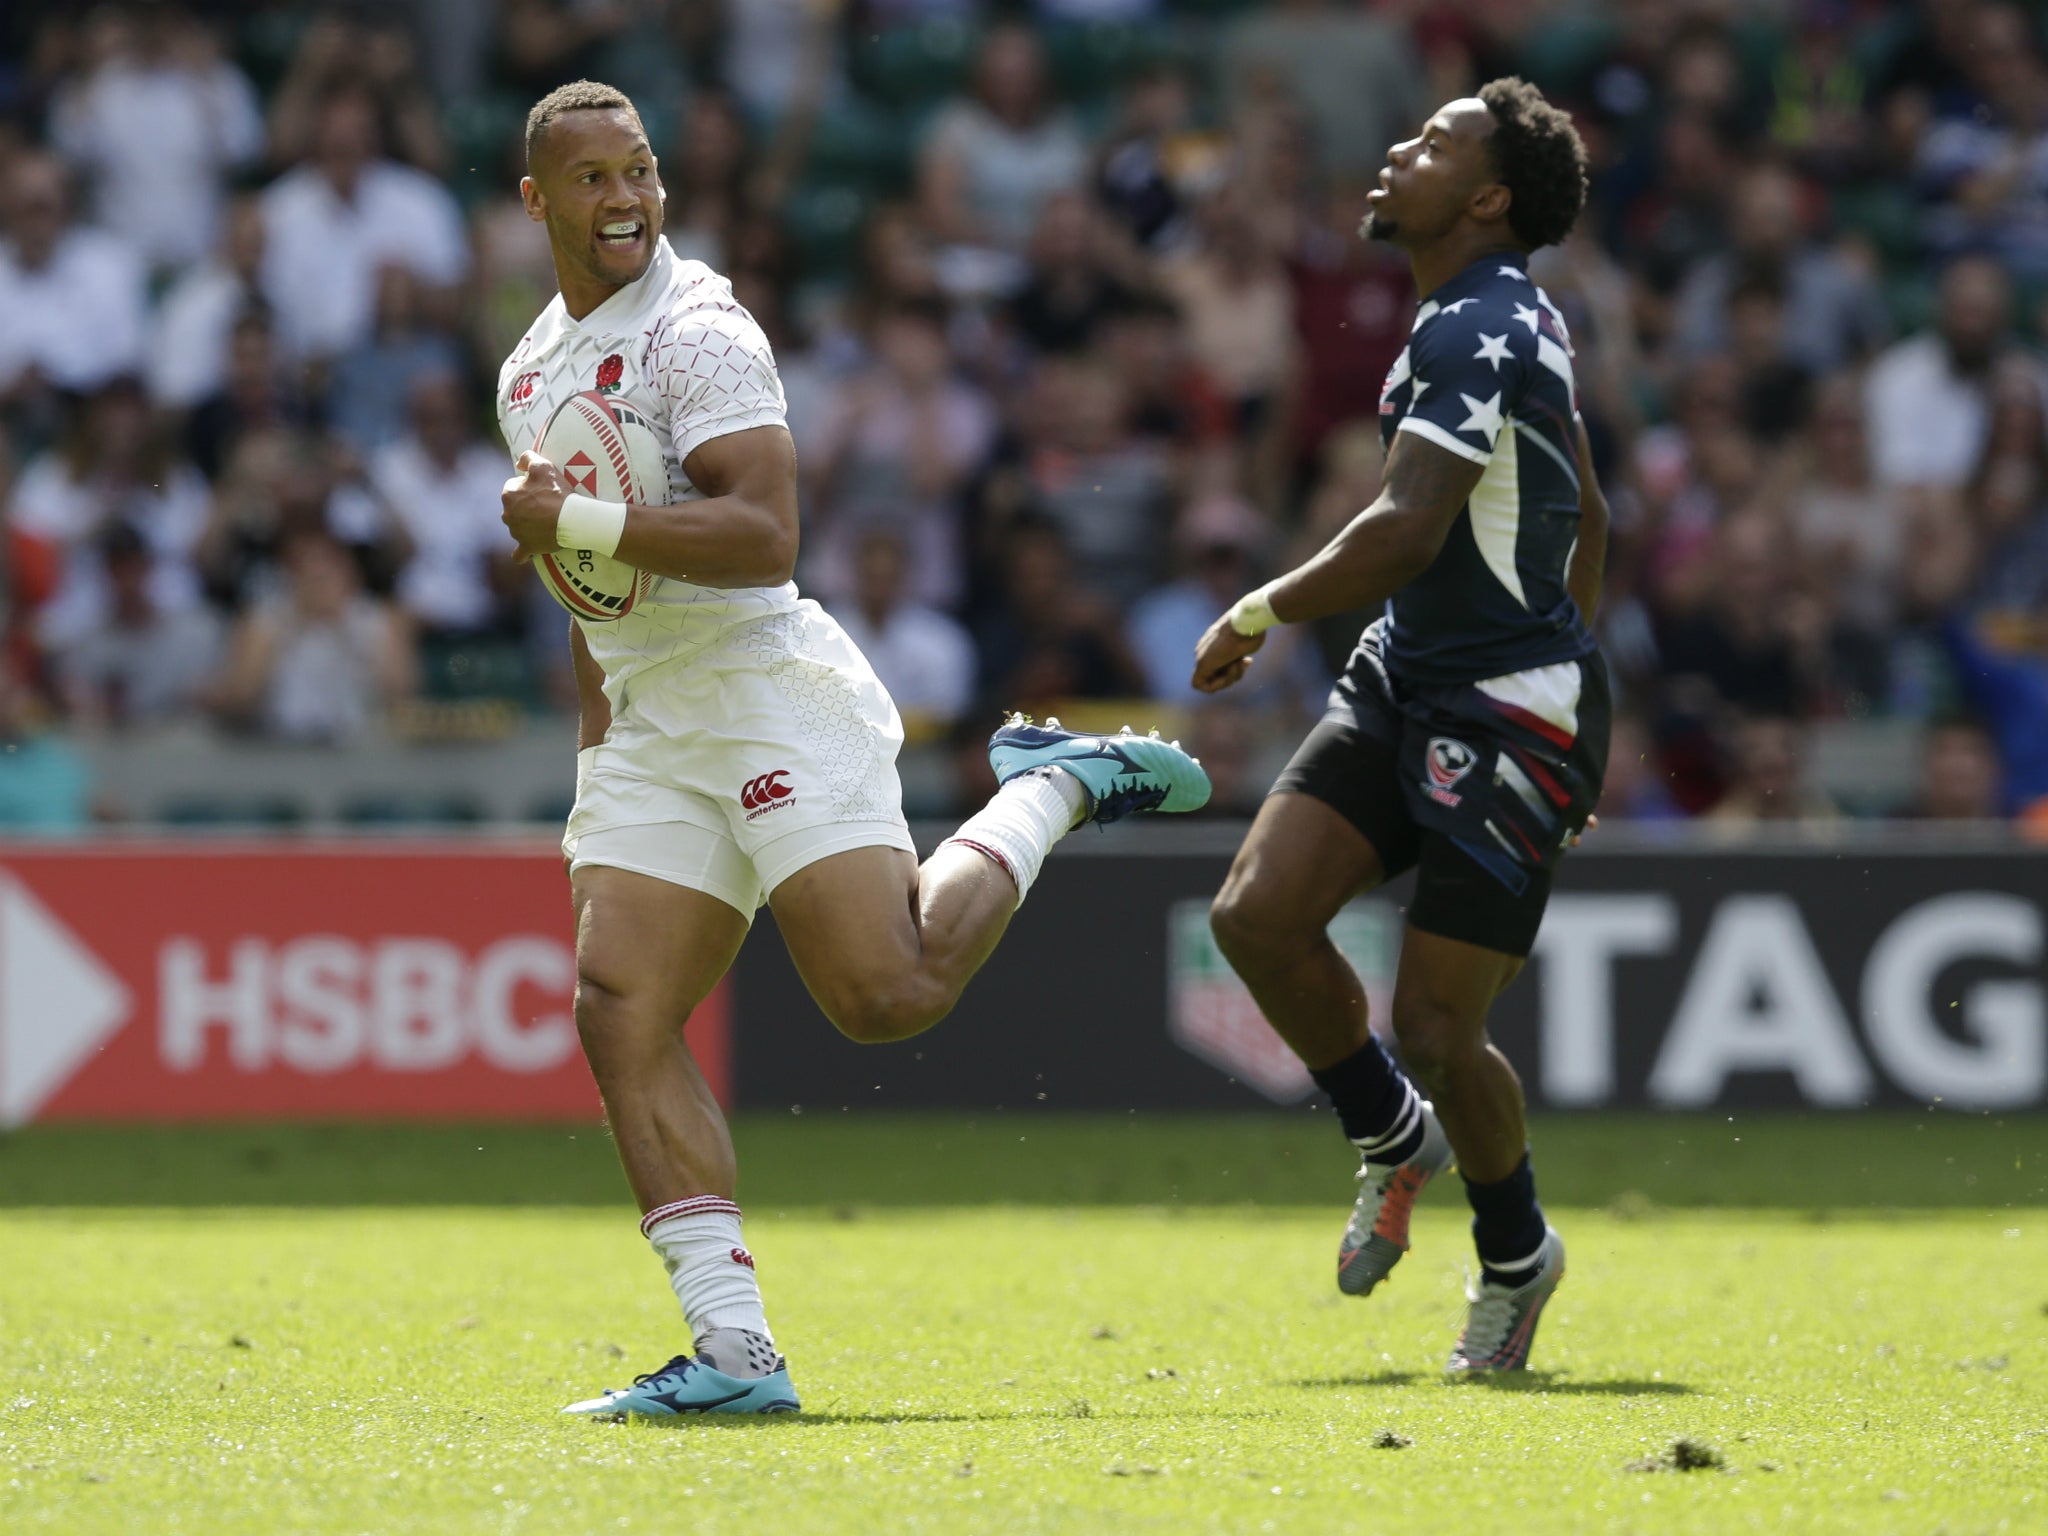 Dan Norton fends off Carlin Isles to score one of two tries against the United States at the London Sevens